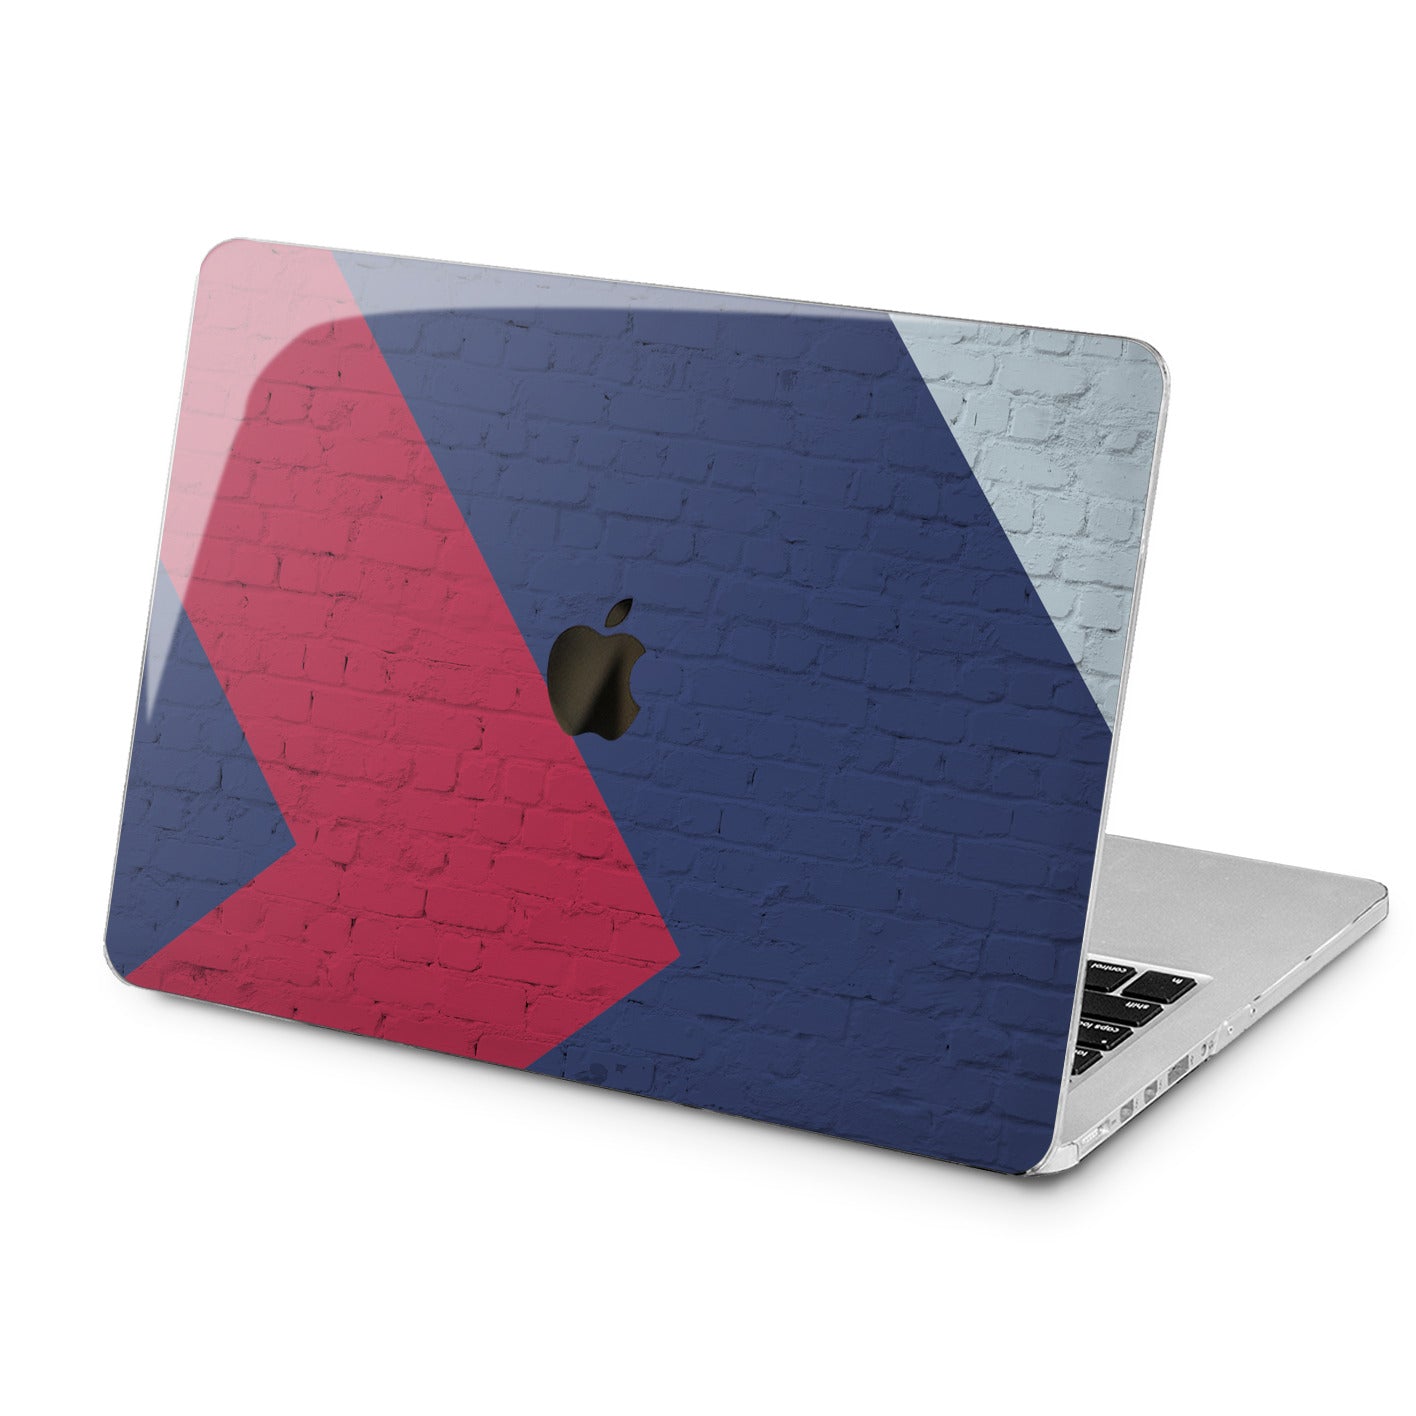 Lex Altern Lex Altern Painted Brick Wall Case for your Laptop Apple Macbook.